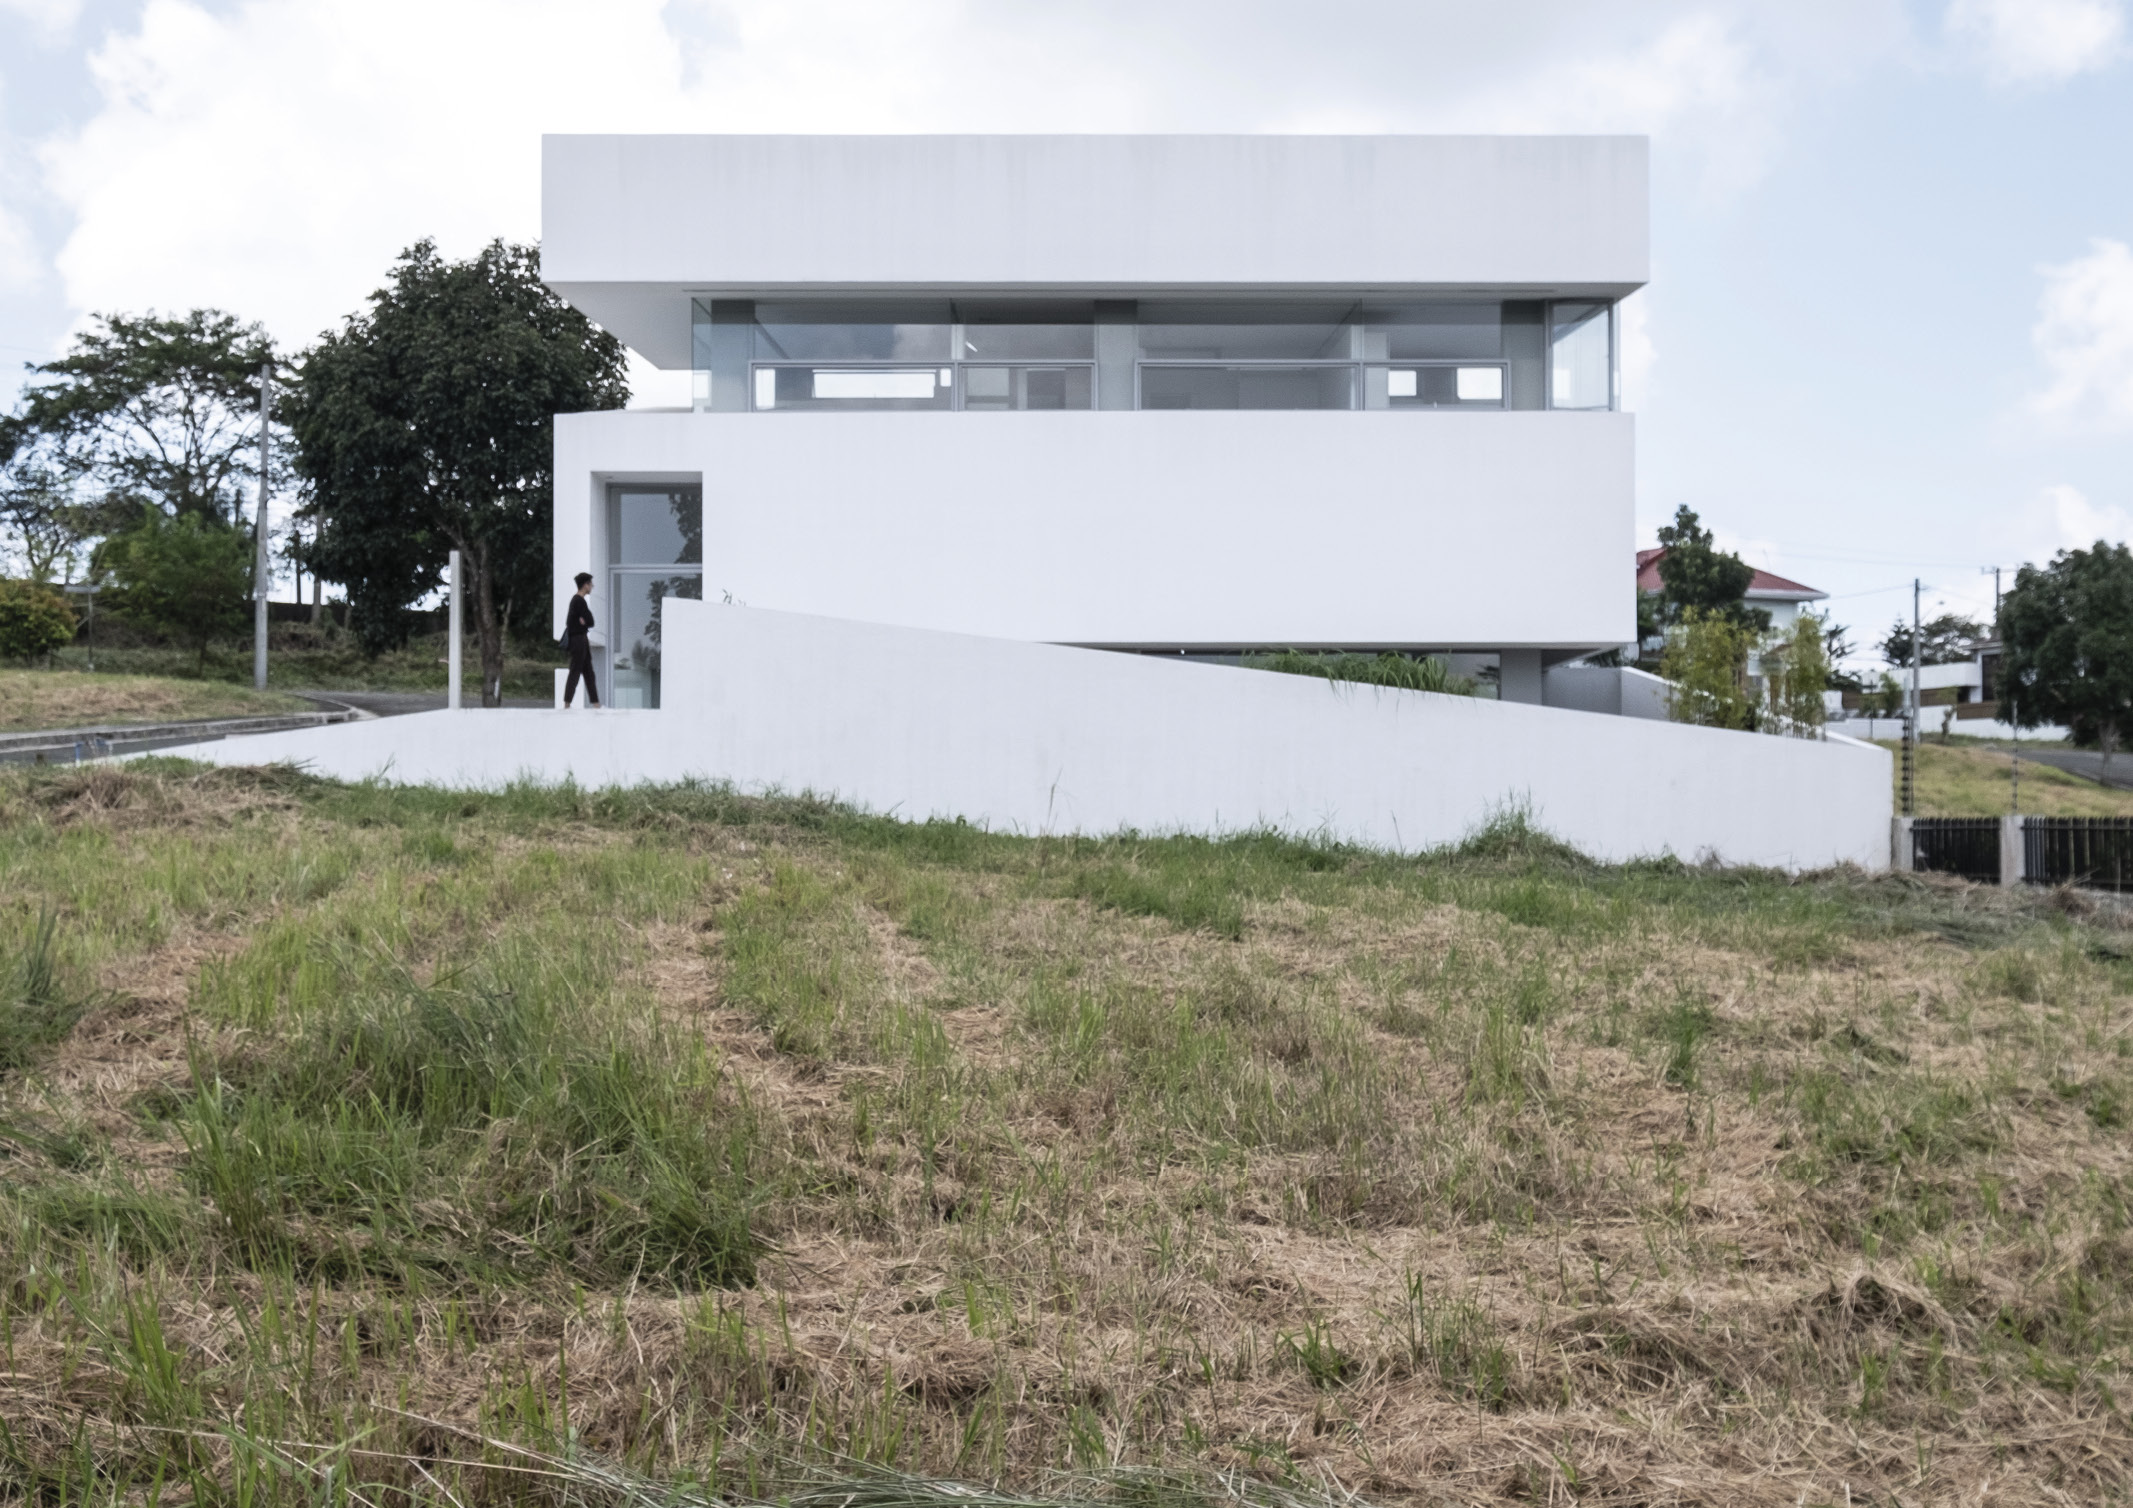 Jim Caumeron's Panaroma House is an all-white structure and a great example of minimalist architecture.